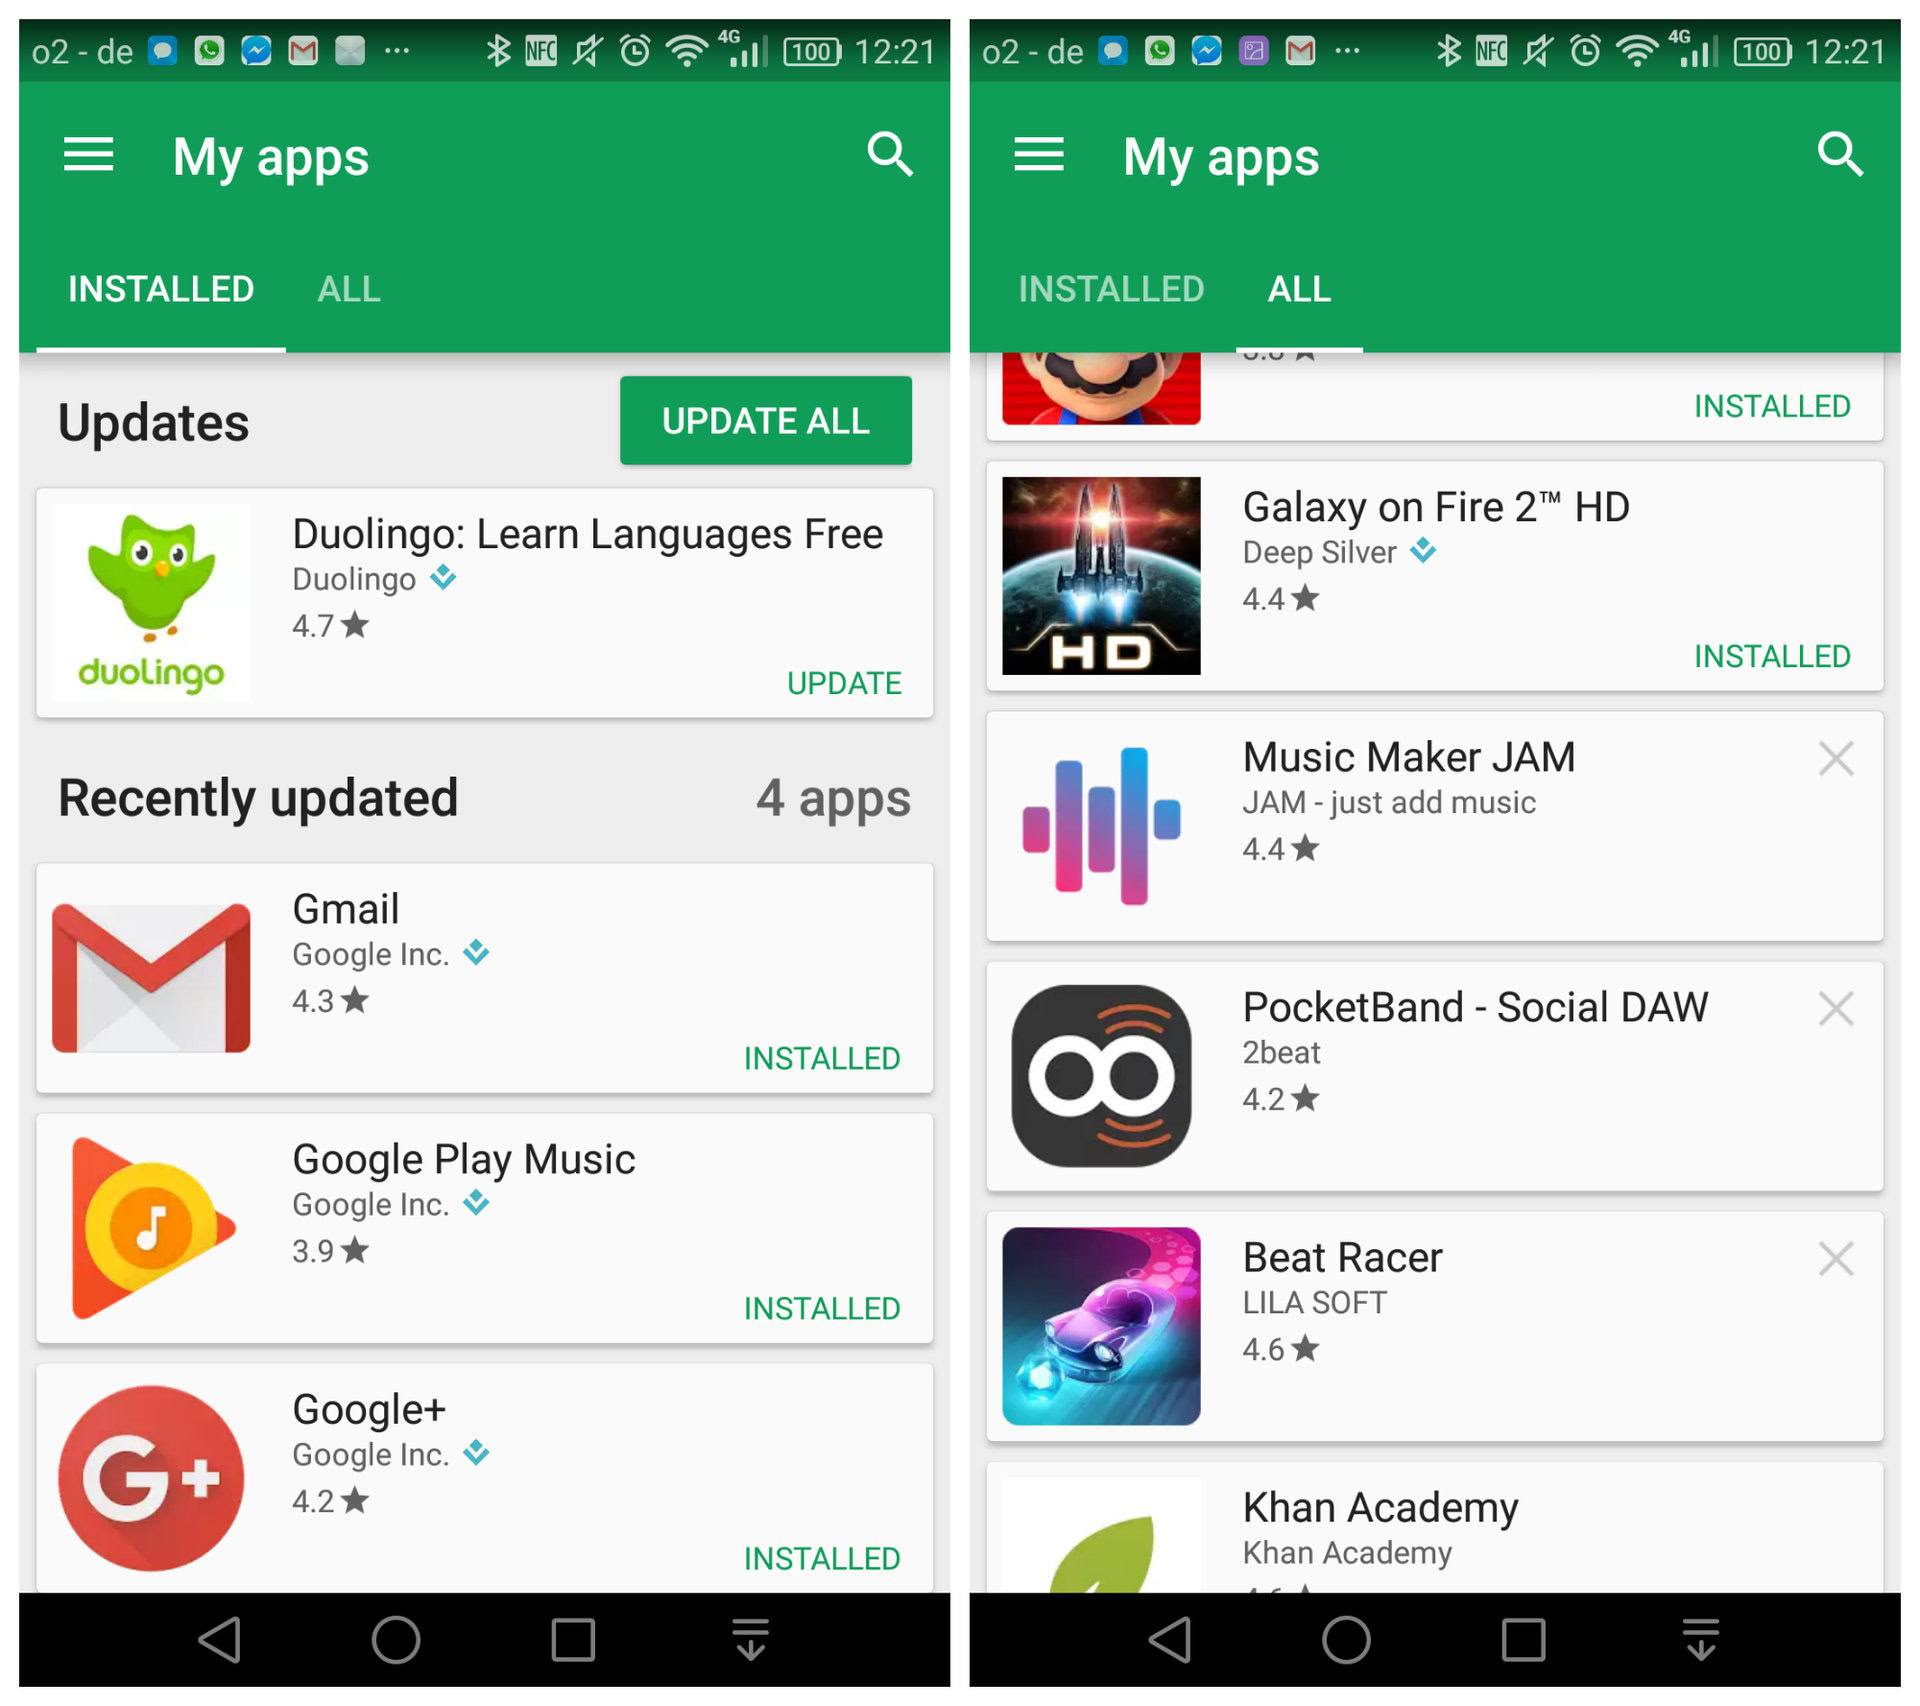 Android Apps by UPLAY Online on Google Play